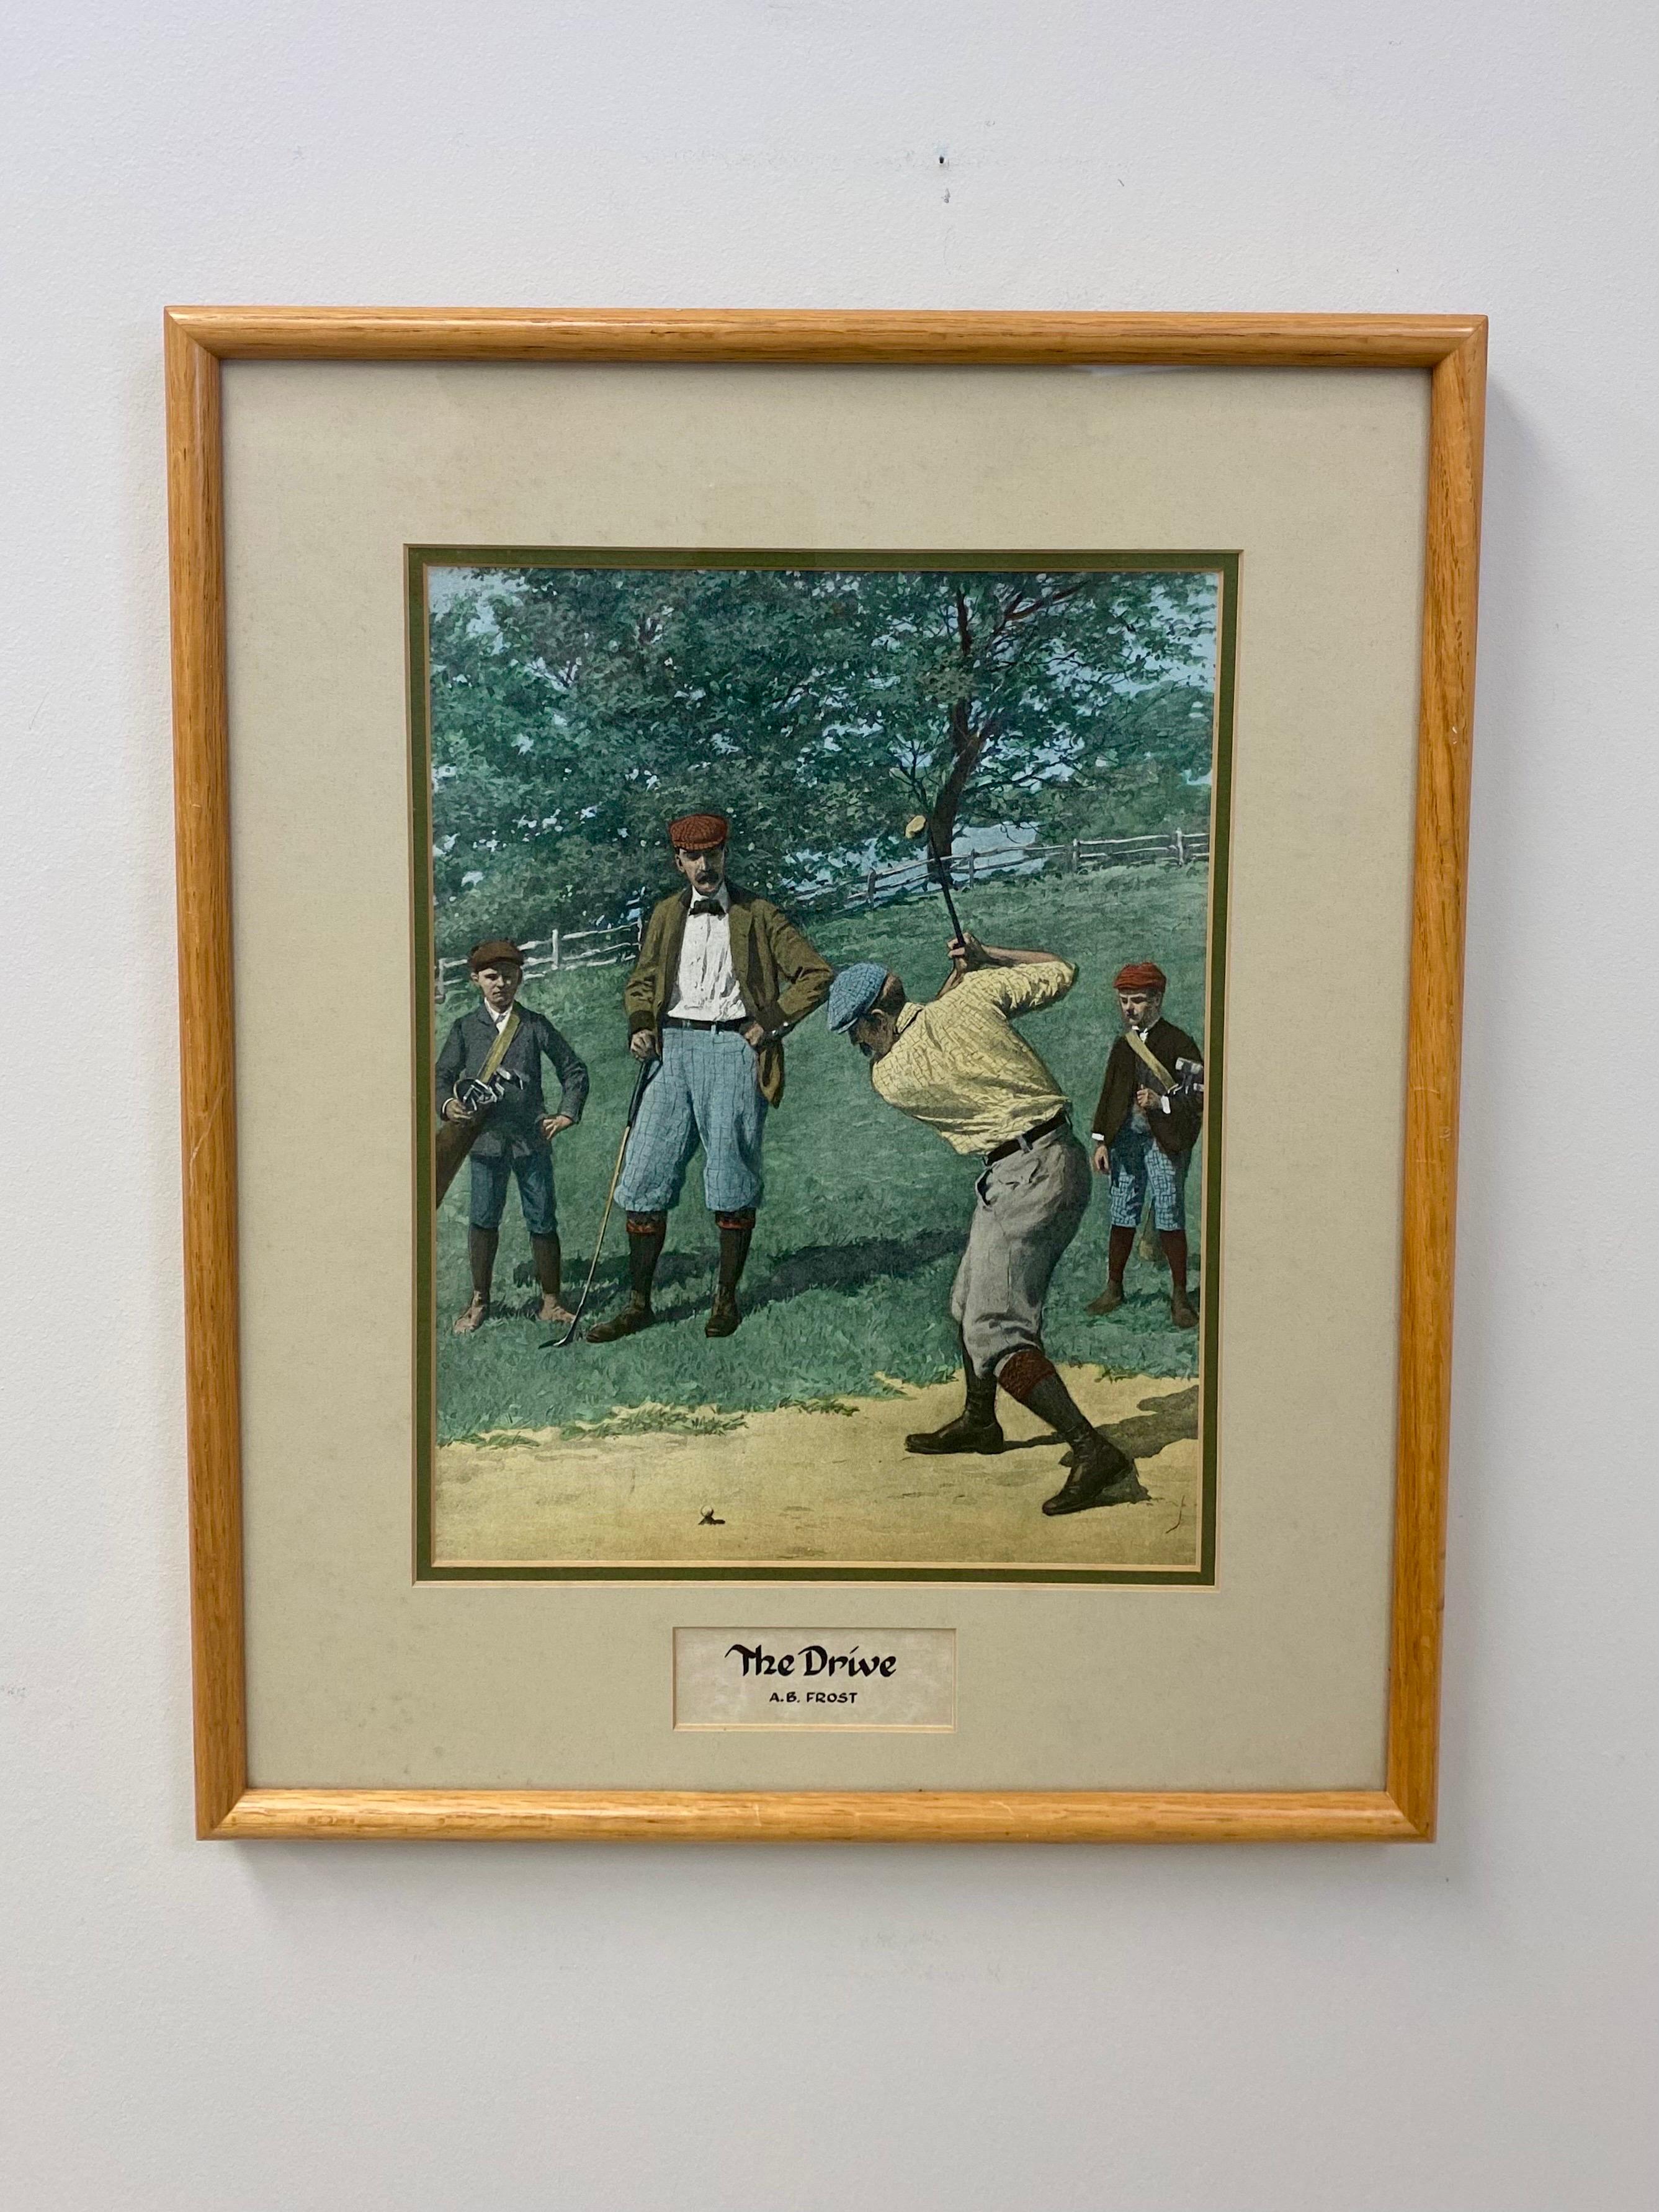 A set of two lithographs depicting a group of men playing golf  by A.B.Frost ( American, 1851-1928).  The lithographs are signed in the bottom, one is entitled 